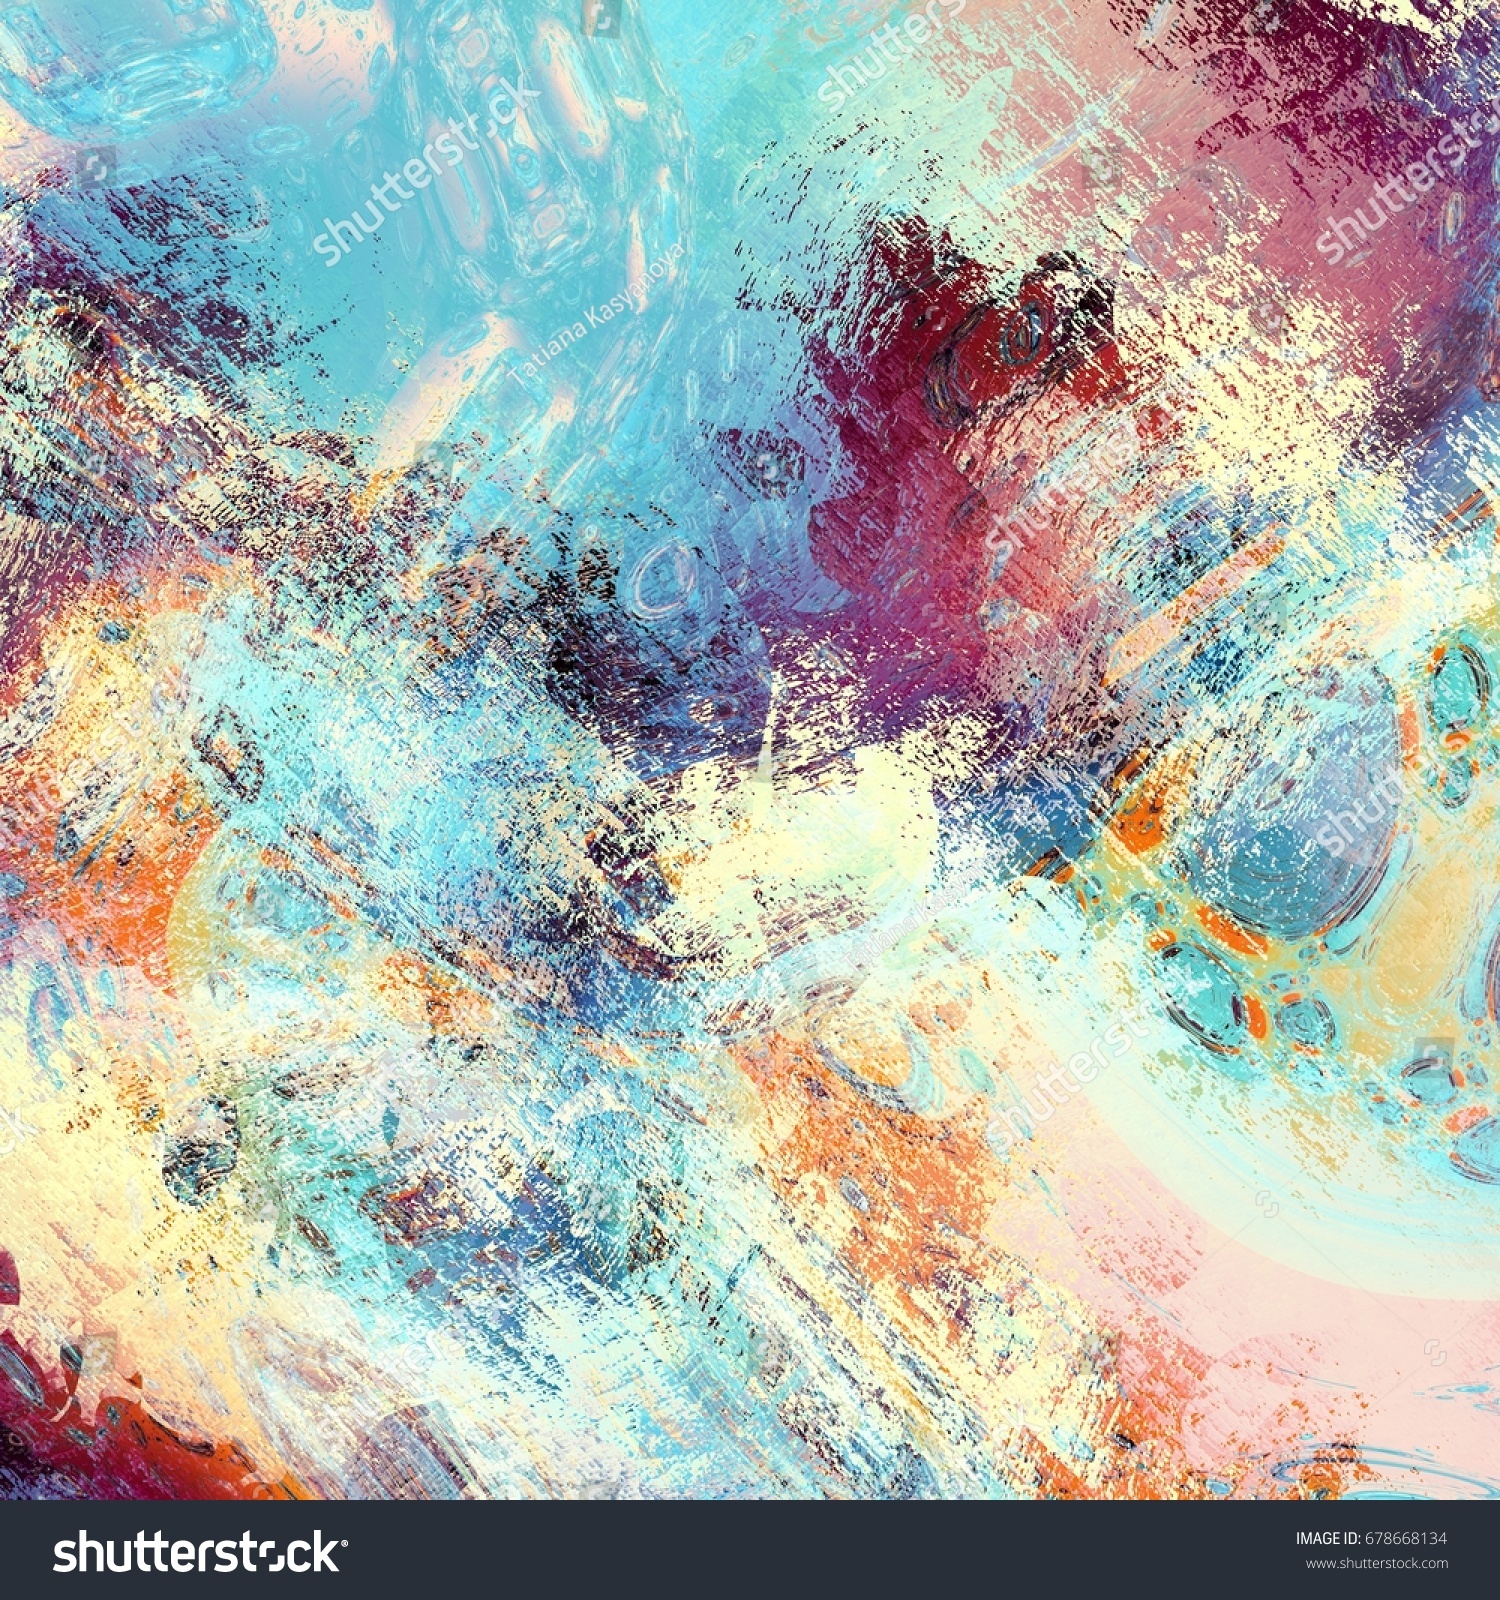 Abstract Grunge Texture Imitation Painting Abstract Stock ...